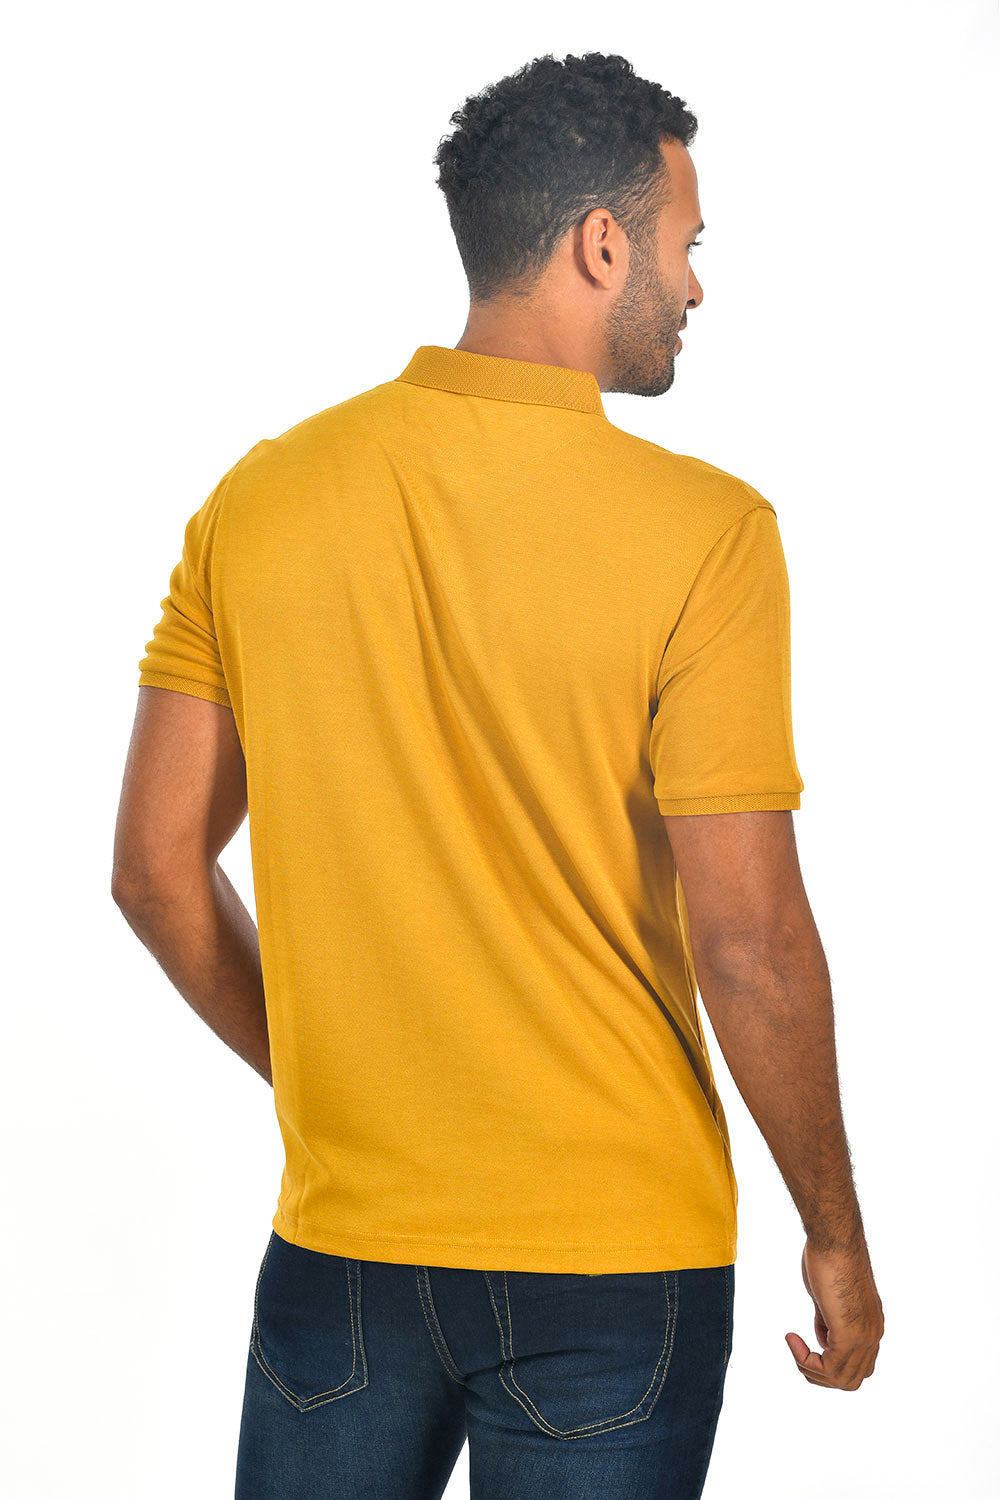 BARABAS Men's solid color Polo shirts with pocket Yellow colors PP817